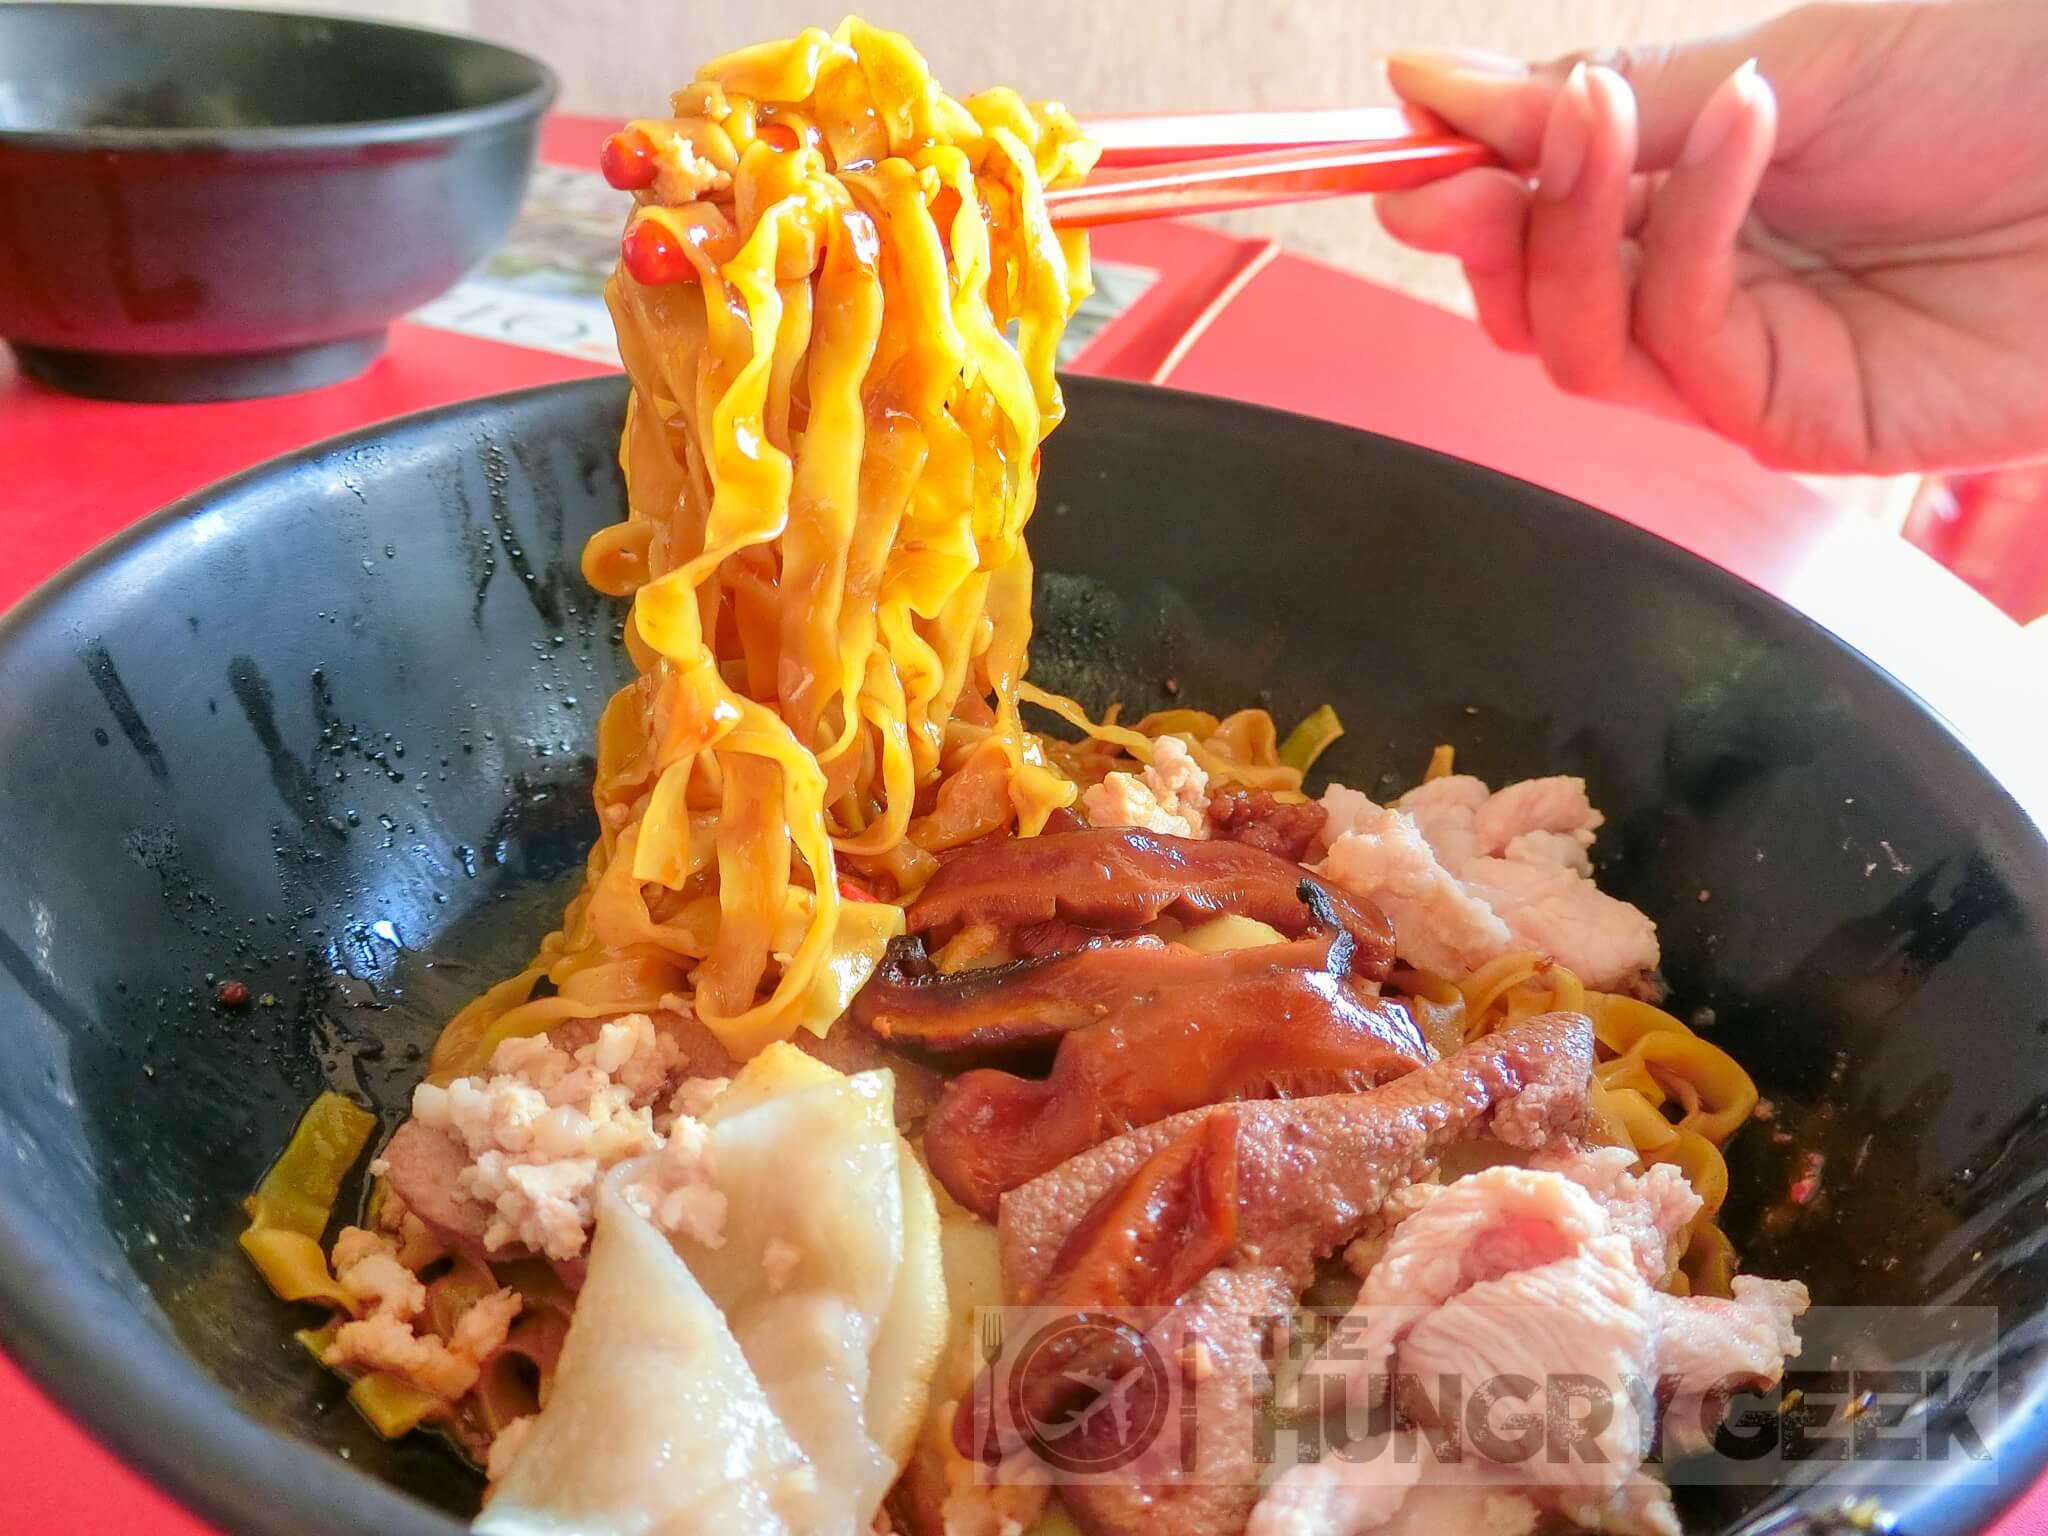 Macpherson Minced Meat Noodles Bak Chor Mee The Hungry Geek